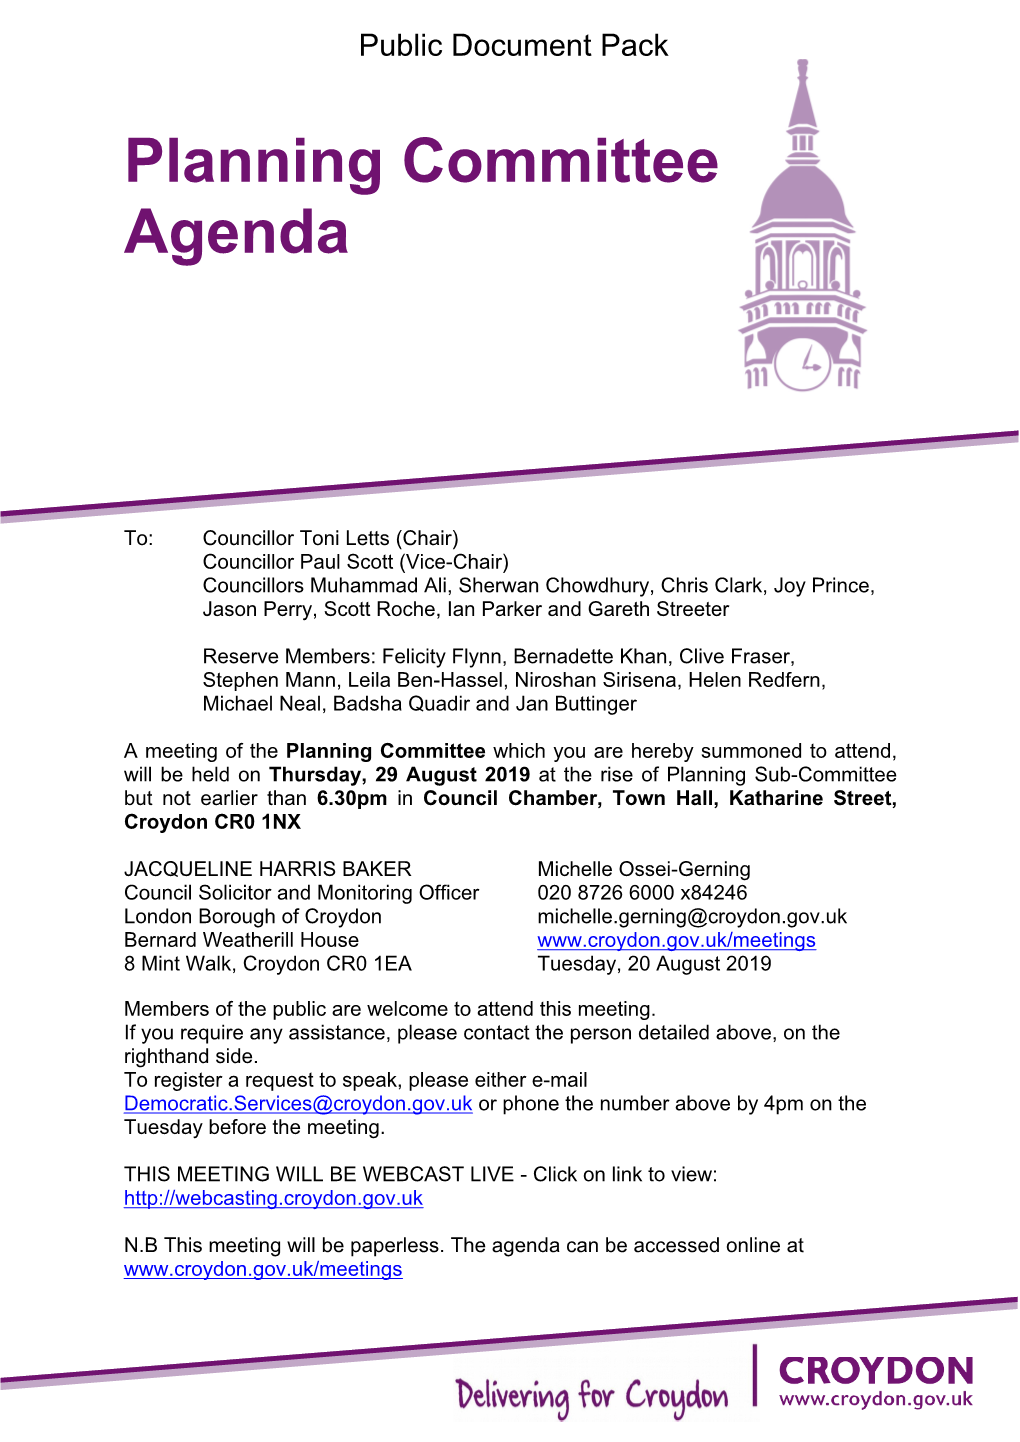 (Public Pack)Agenda Document for Planning Committee, 29/08/2019